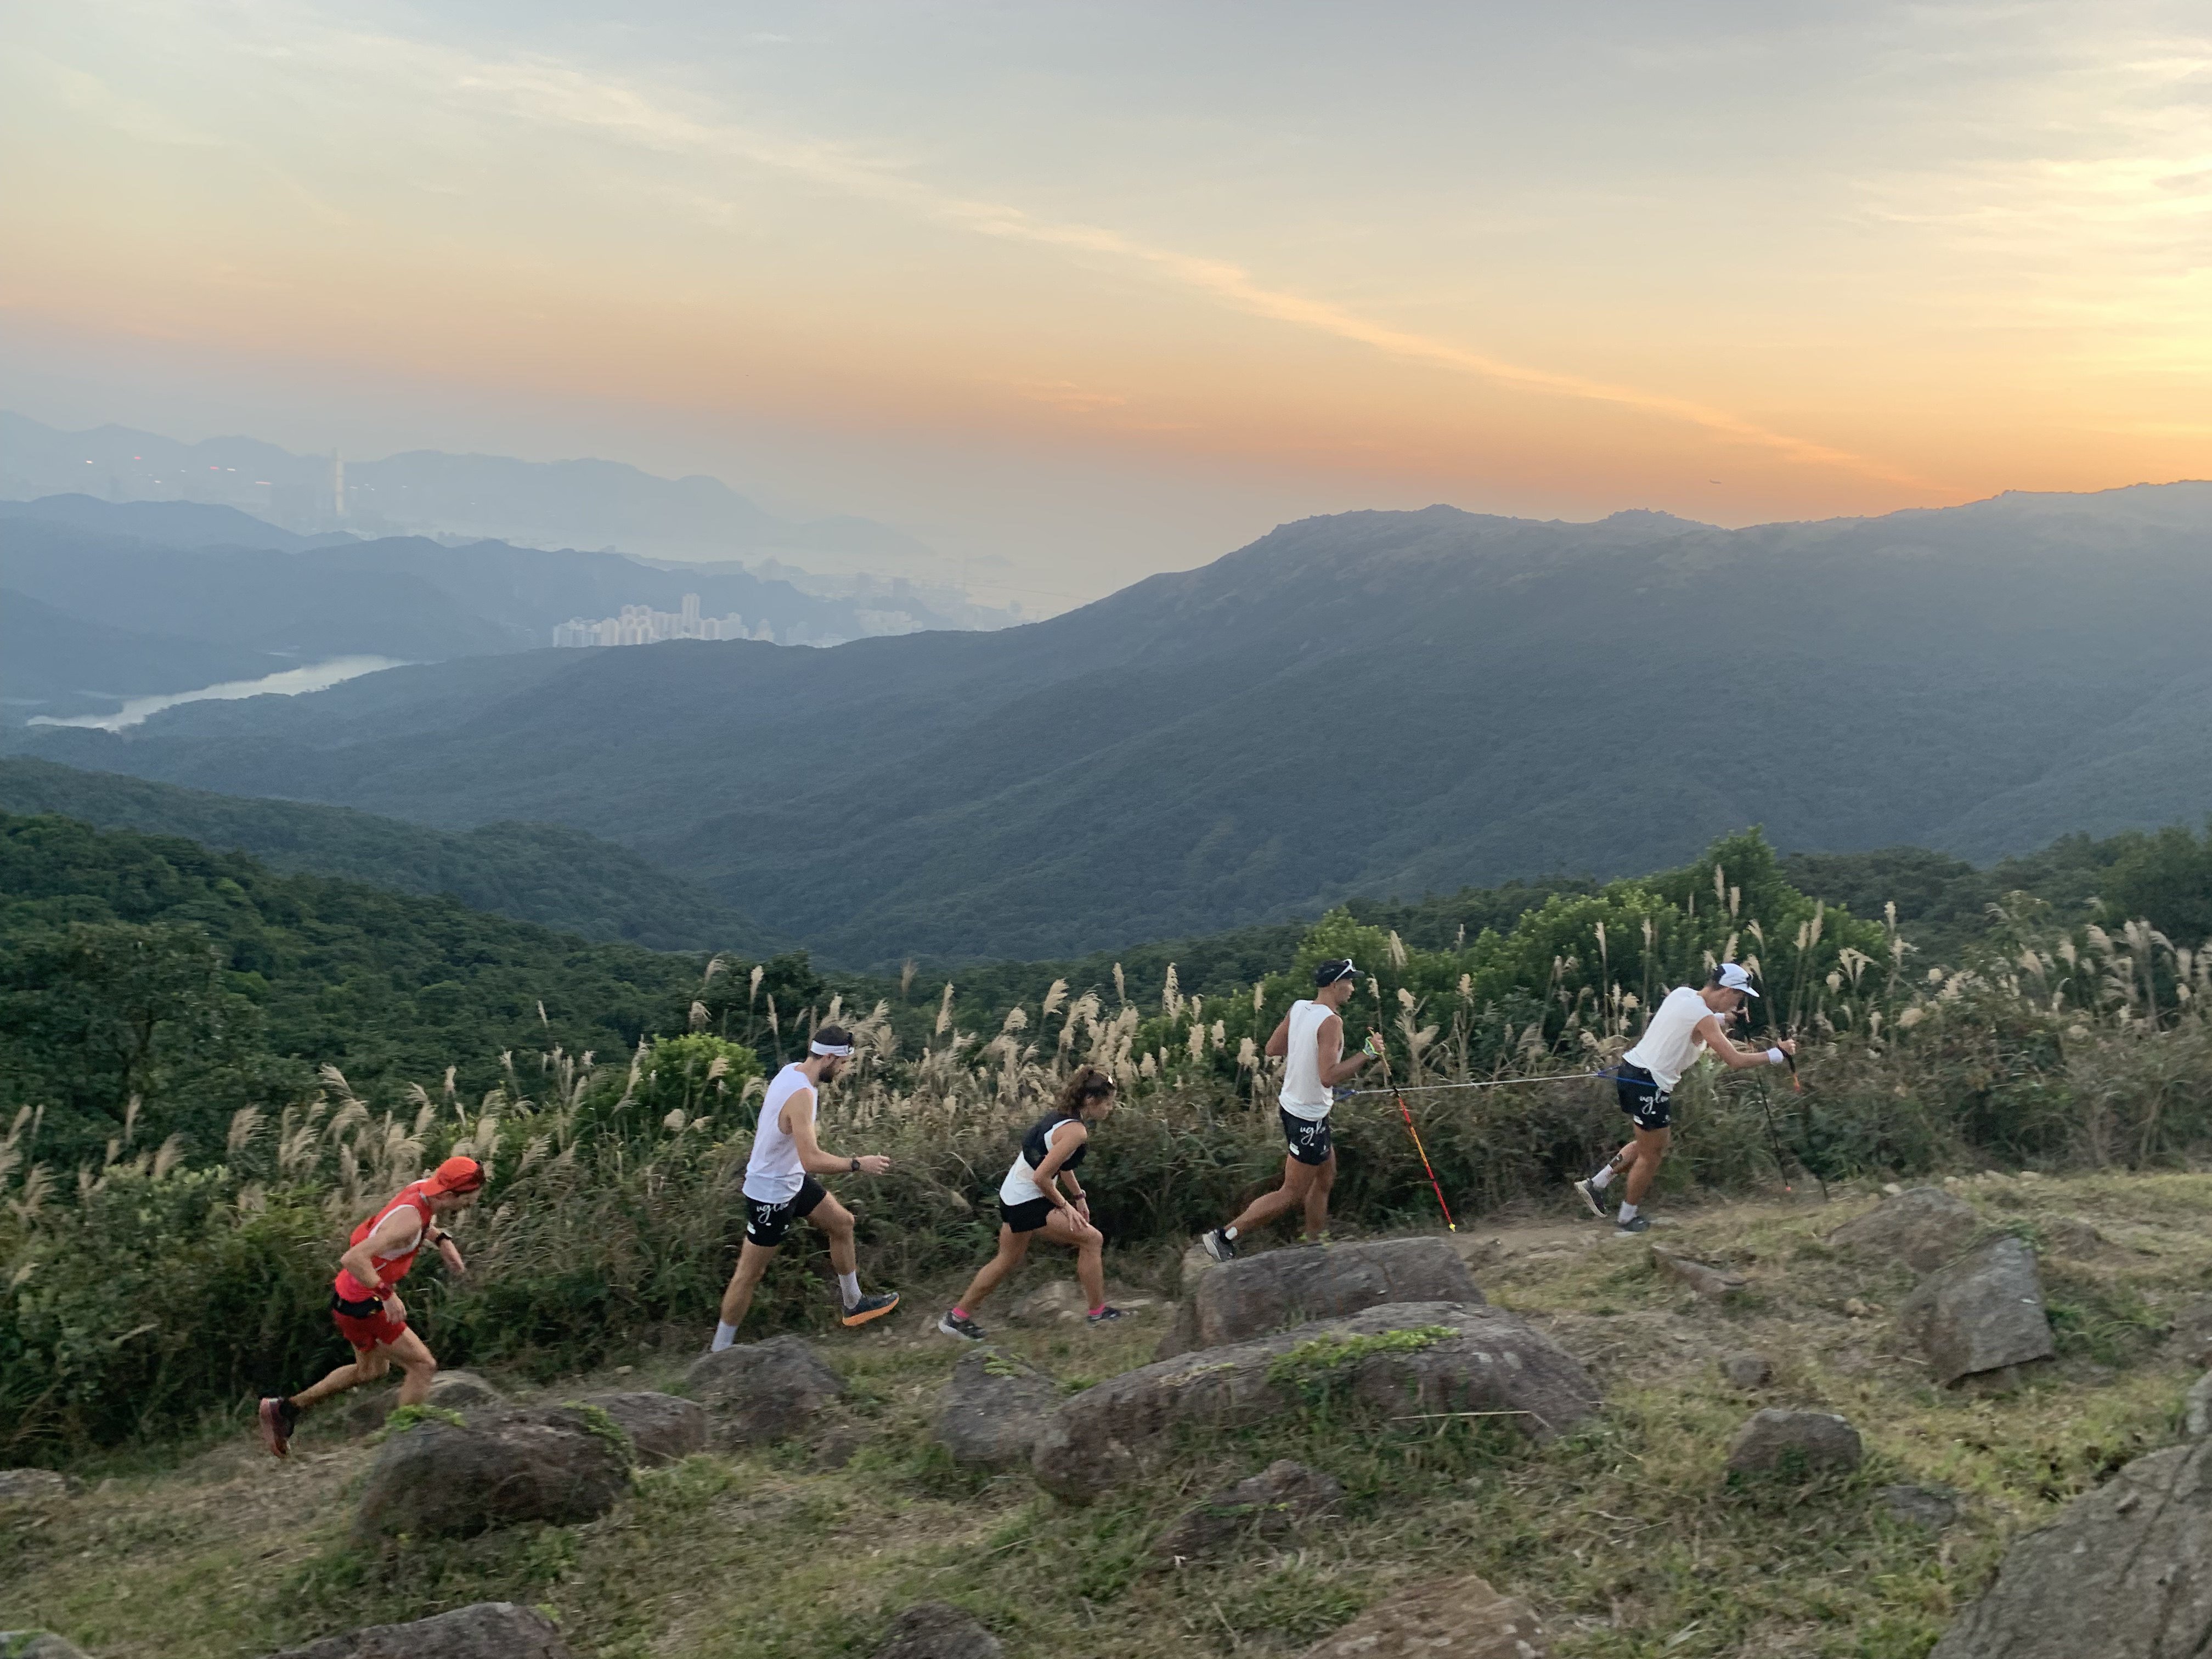 Frenchmen Paul Fournier, Mat Leng, Guillaume Perrot and Slovakian Veronika Vadovicova set the mixed team record at the Oxfam Trailwalker, in 13:28. Photo: Handout